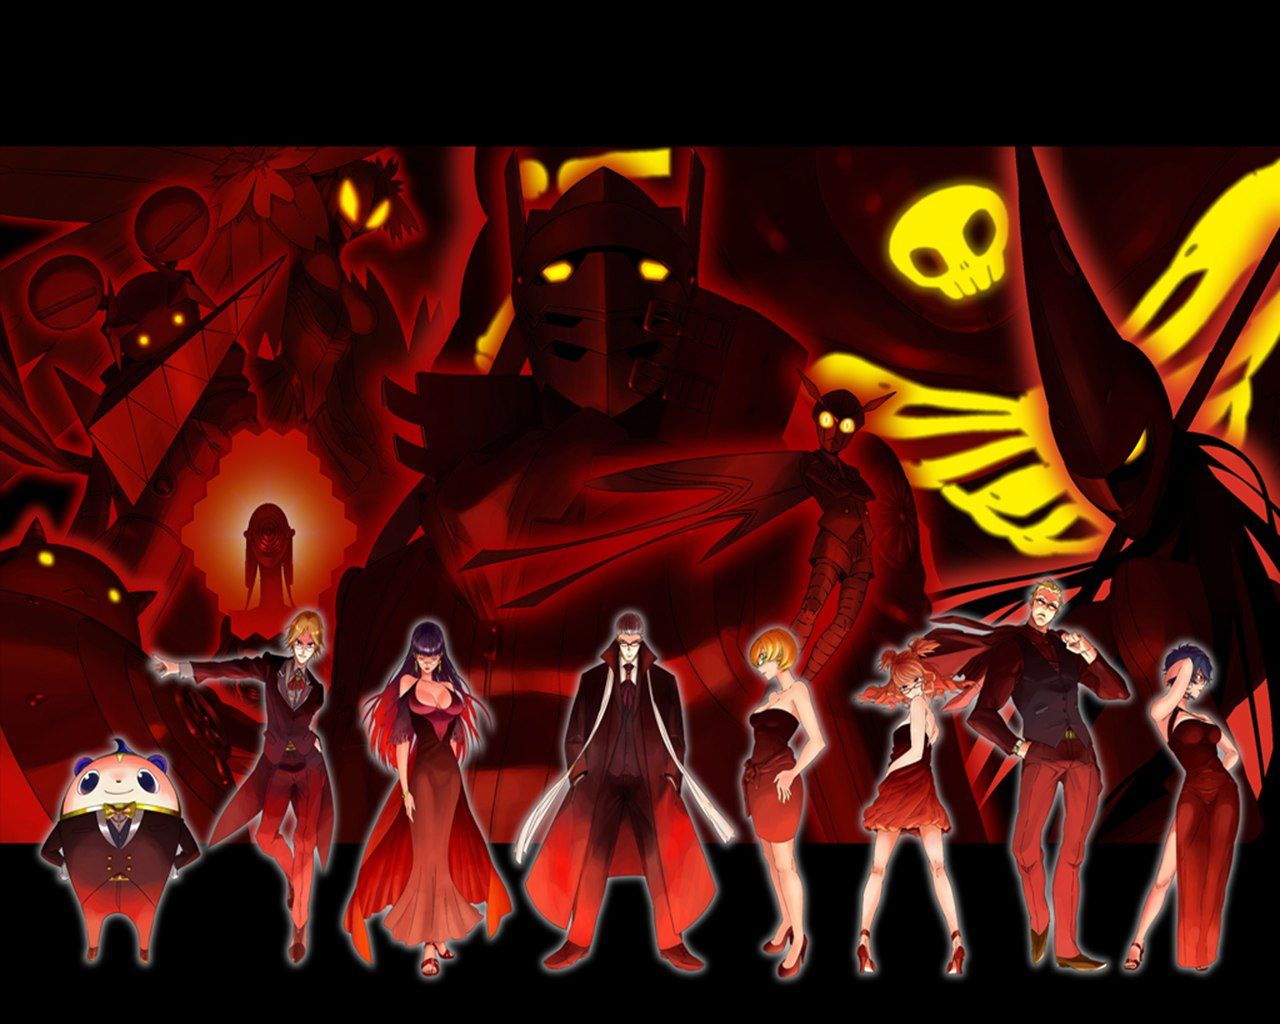 Persona 4 wallpaper 1280x1024 - (#26896) - High Quality and ...